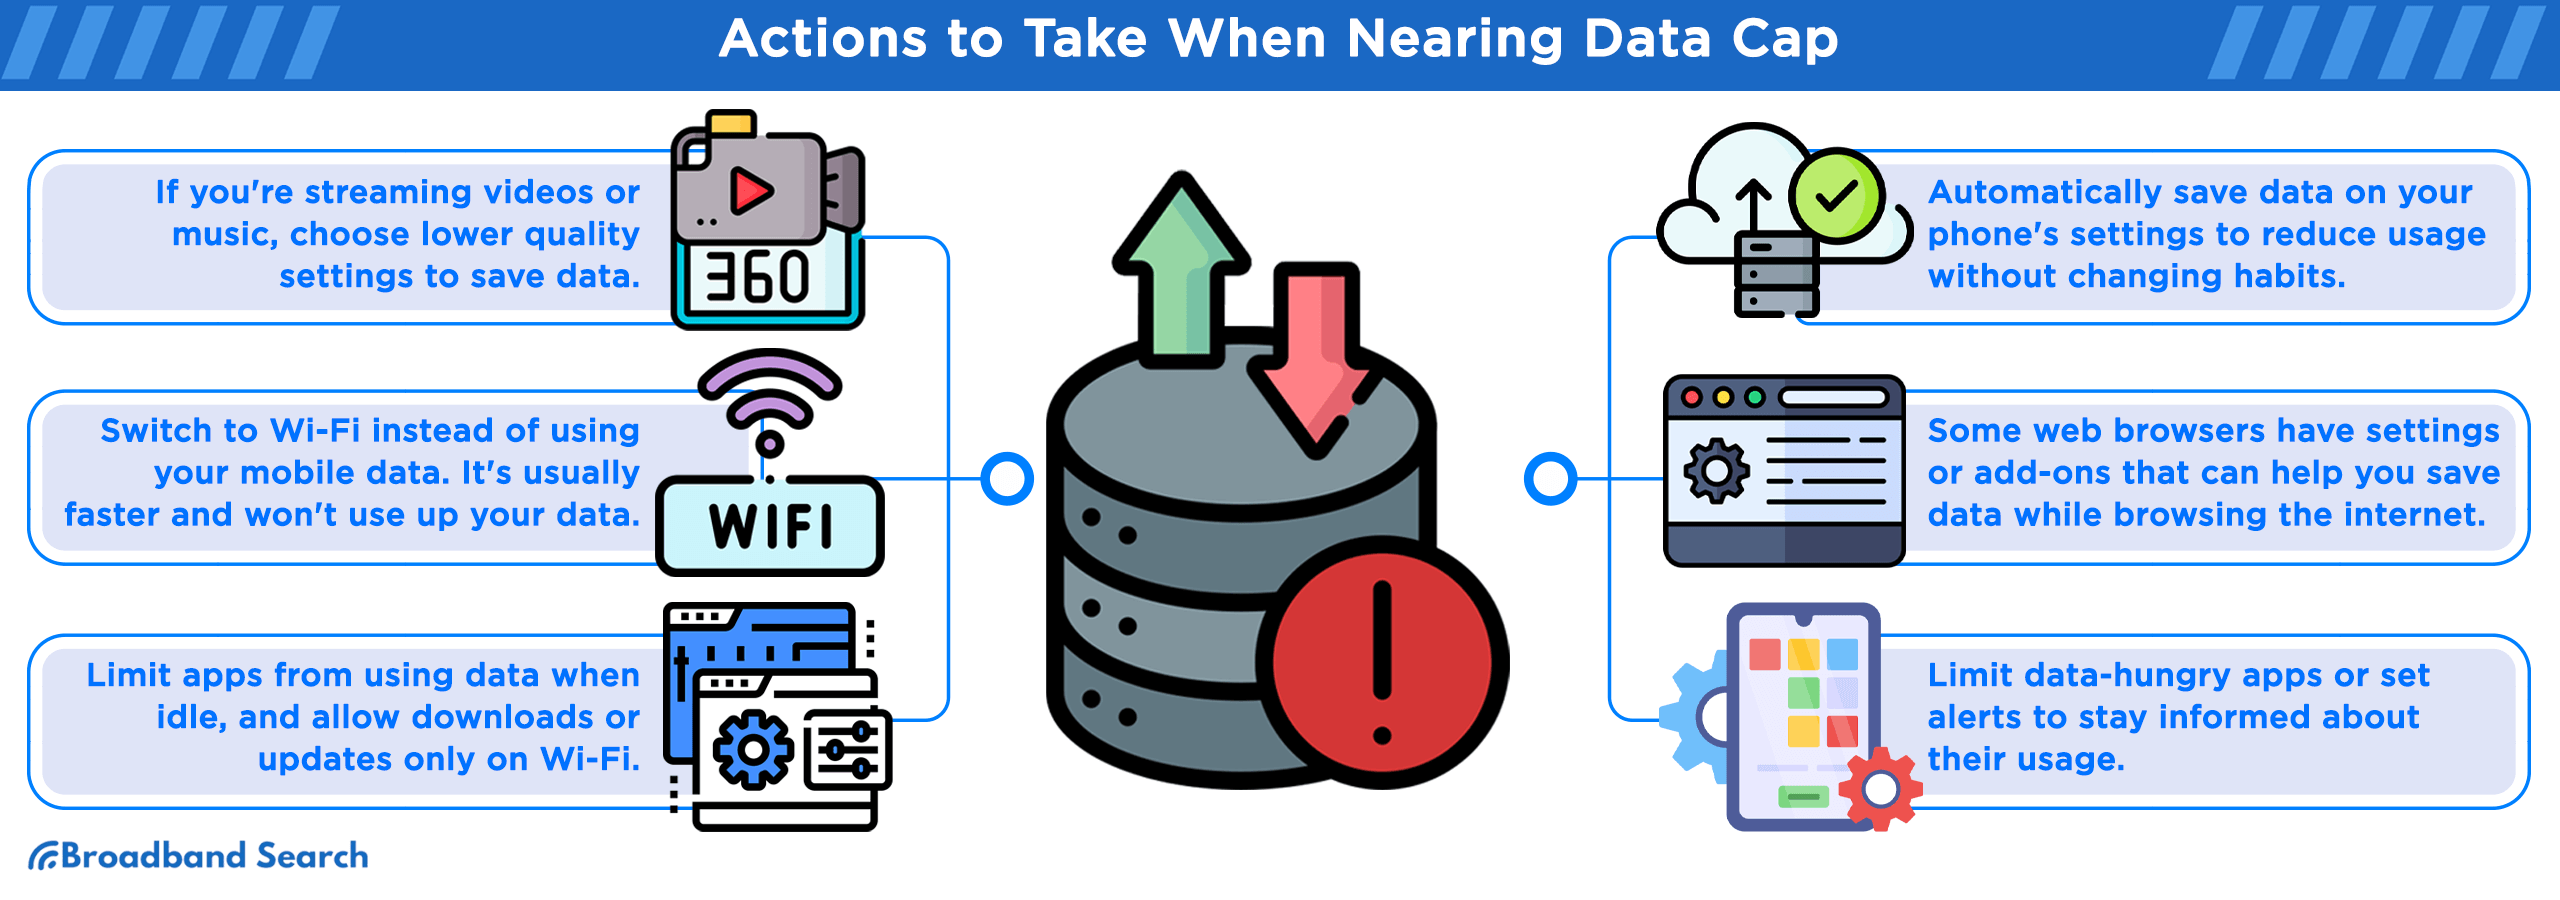 Actions to take when nearing data cap